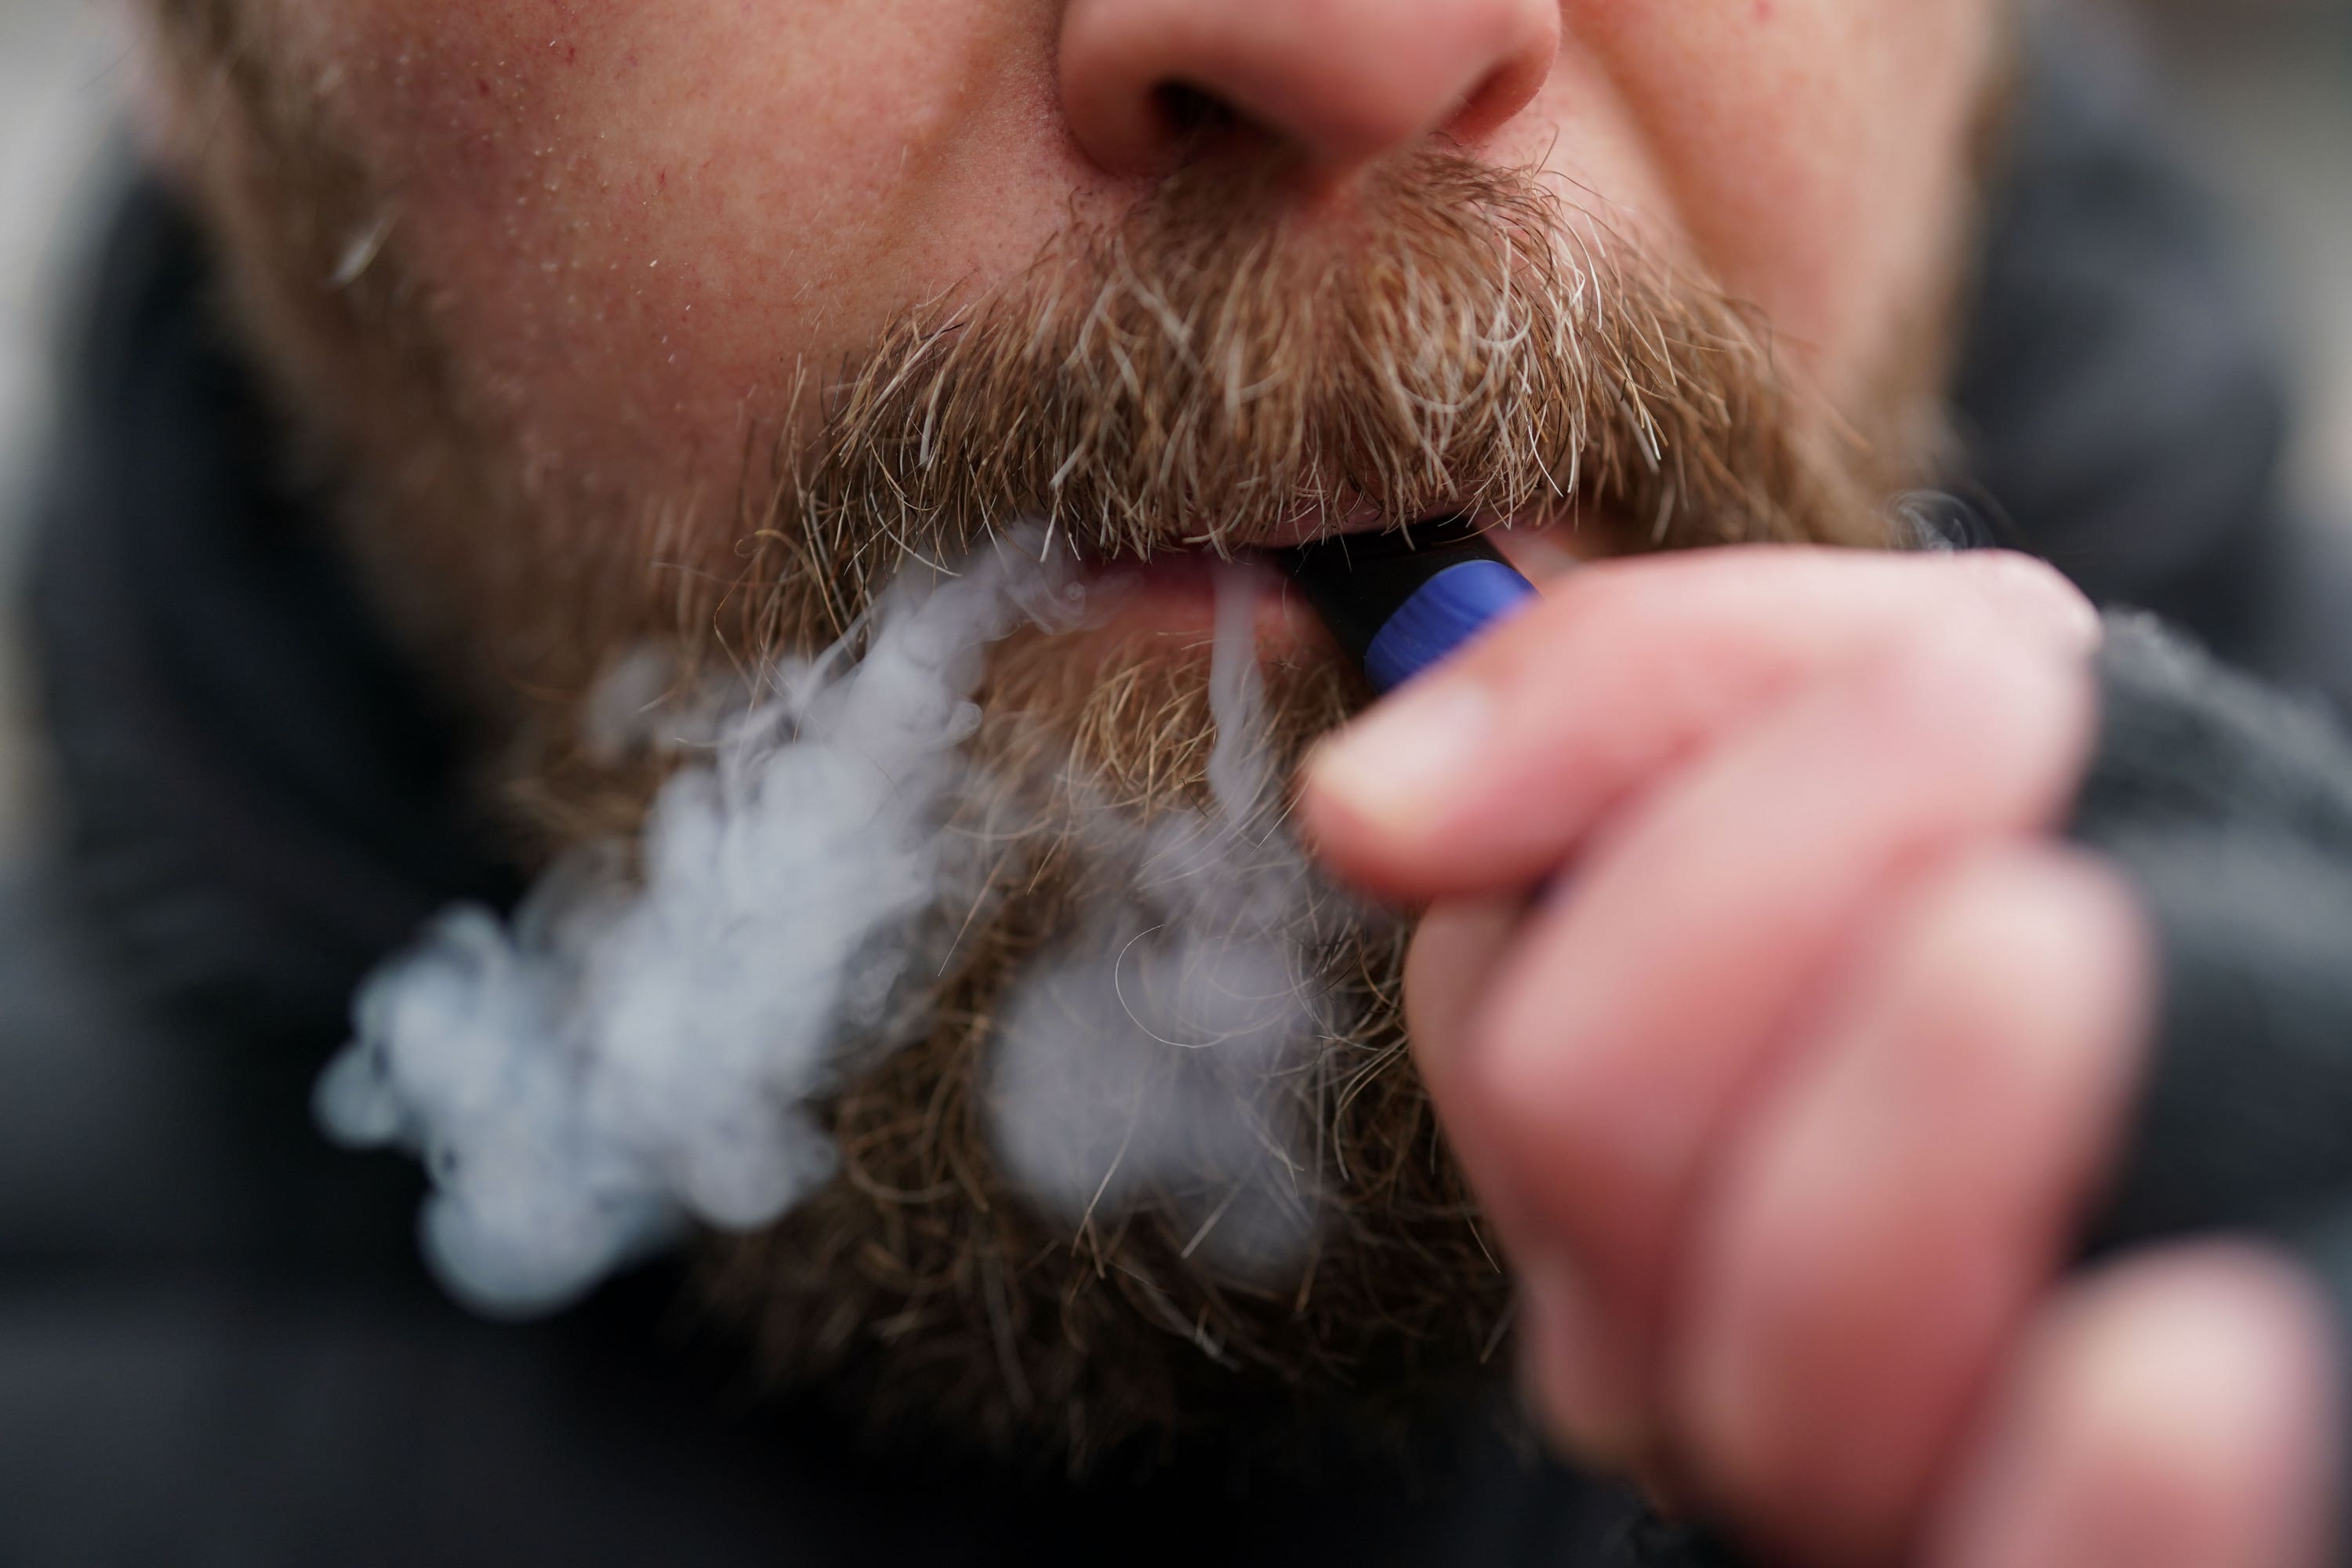 Blackburn was named as the vape capital of the UK with nearly 22.56 e-cigarette shops per 100,000 people